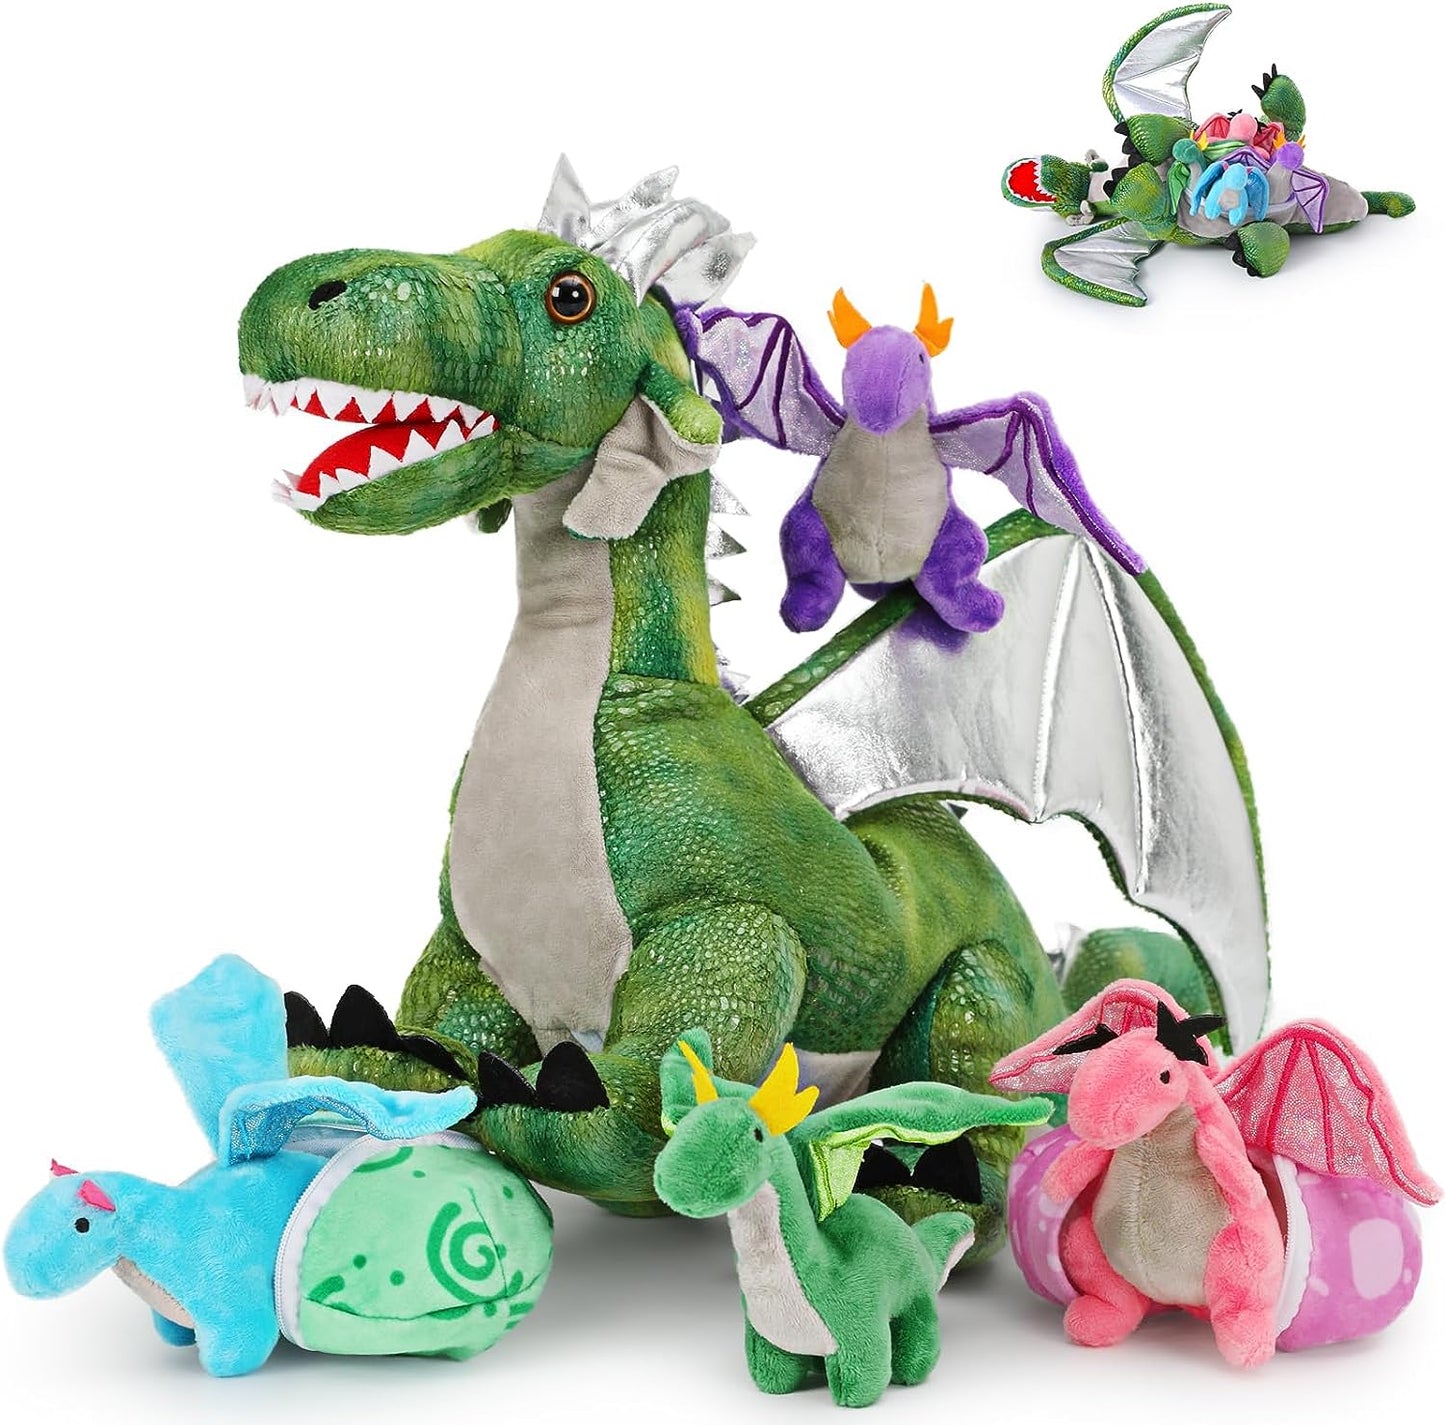 Flying Dragon Stuffed Toy Set, 21.6 InchesYou'll absolutely love our marvelous Flying Dragon Plush Toy. It arrives with 4 cool mini dragon plushies and 2 adorable dragon eggs. This plushie set is made from the softest faux fur and plush PP cotton filling, not just making it look impressive but also making it cuddly. A fantastic present for anyone who loves stuffed toys!